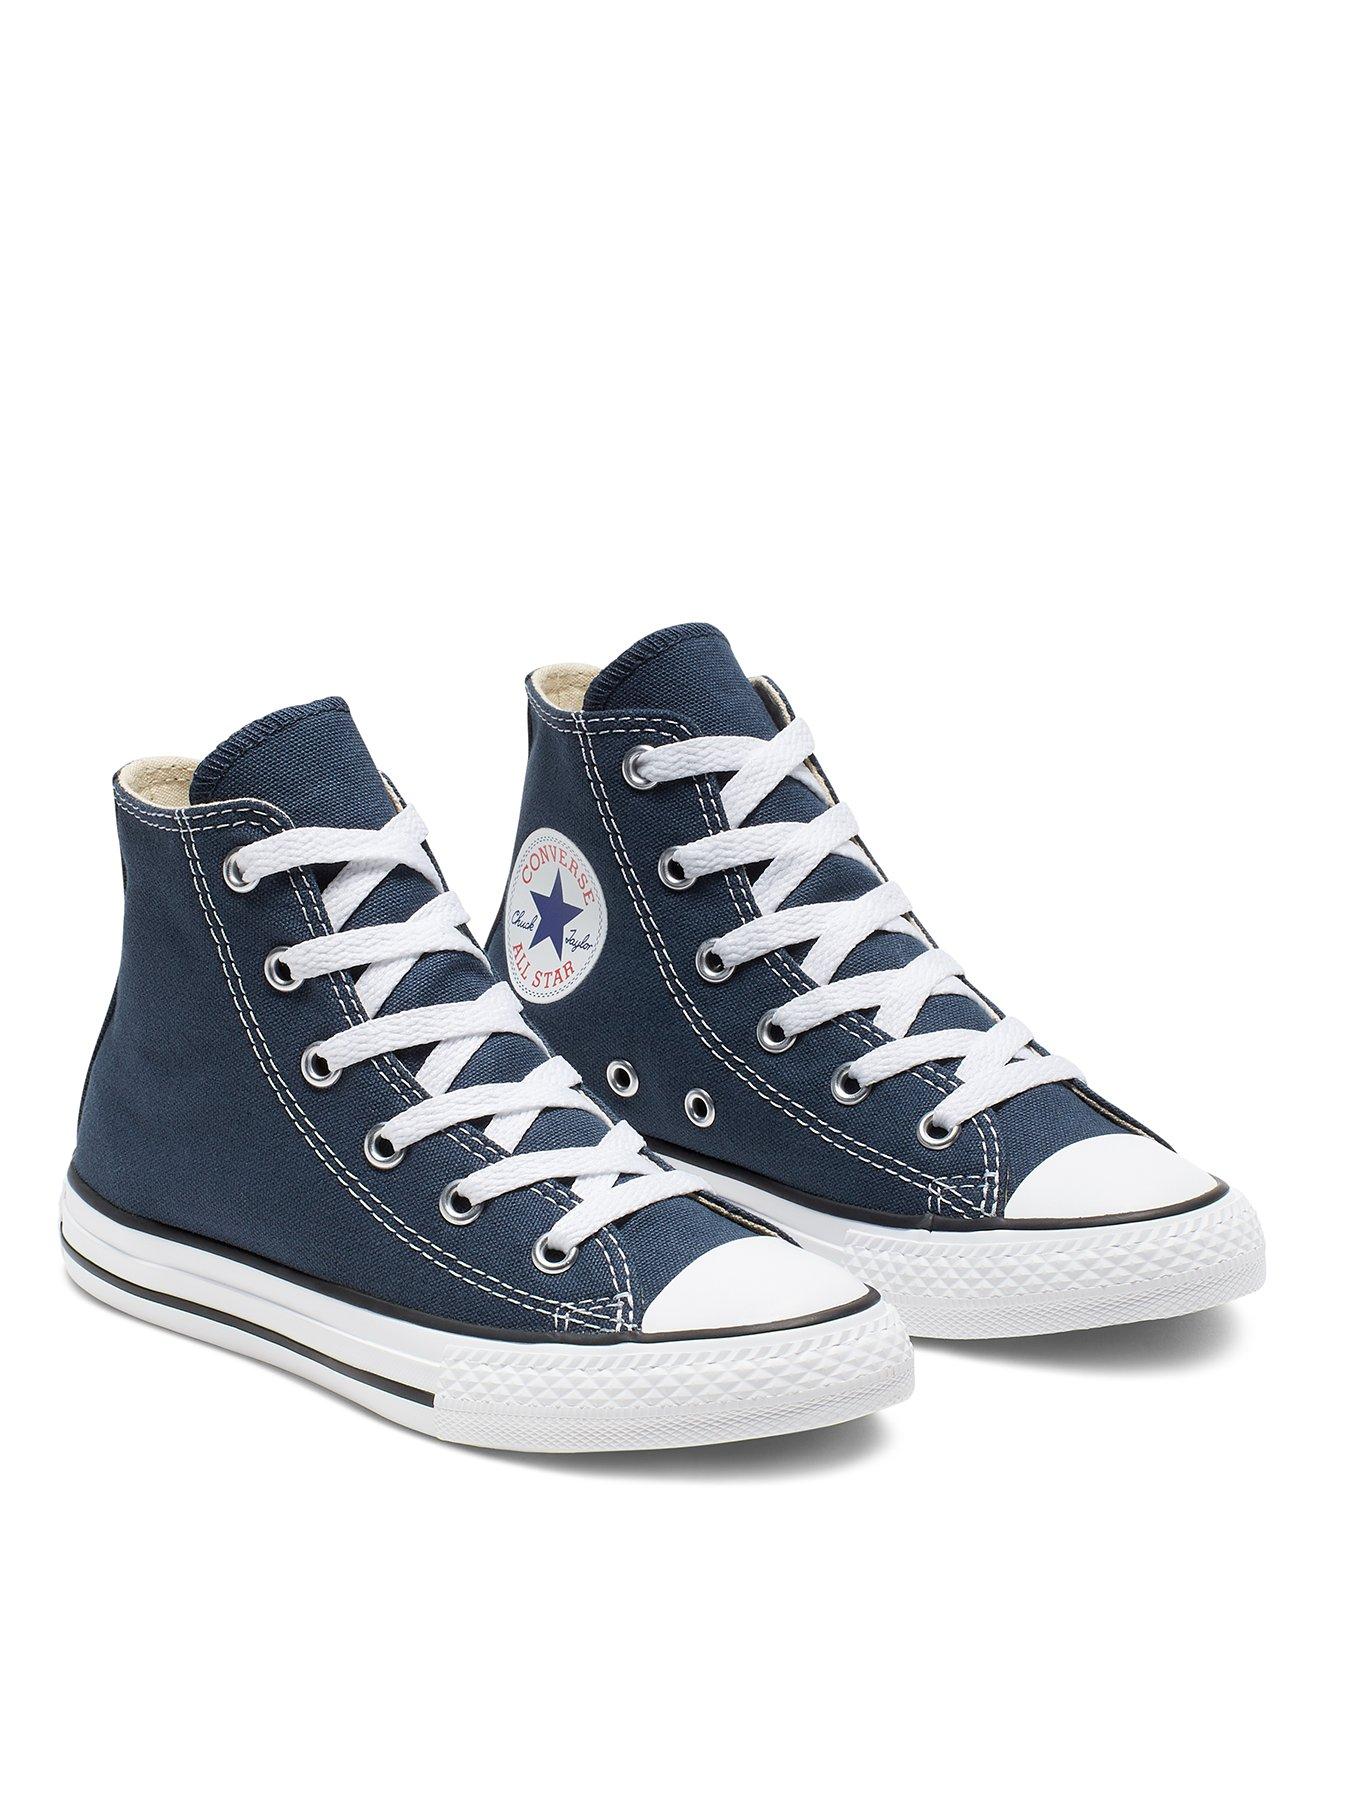 trainers converse